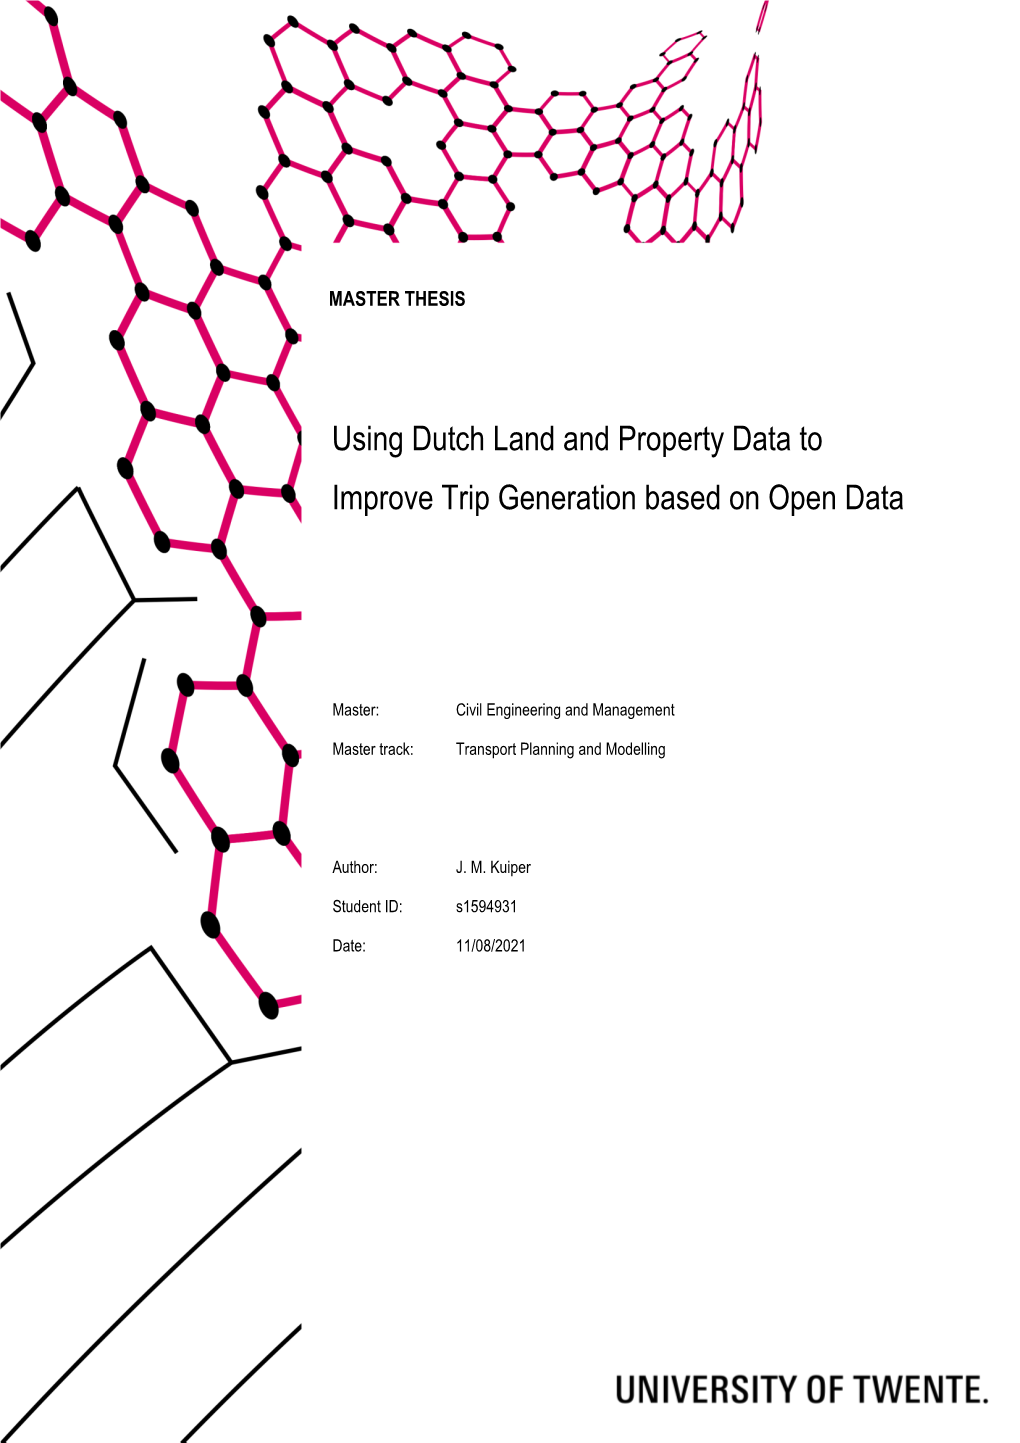 Using Dutch Land and Property Data to Improve Trip Generation Based on Open Data